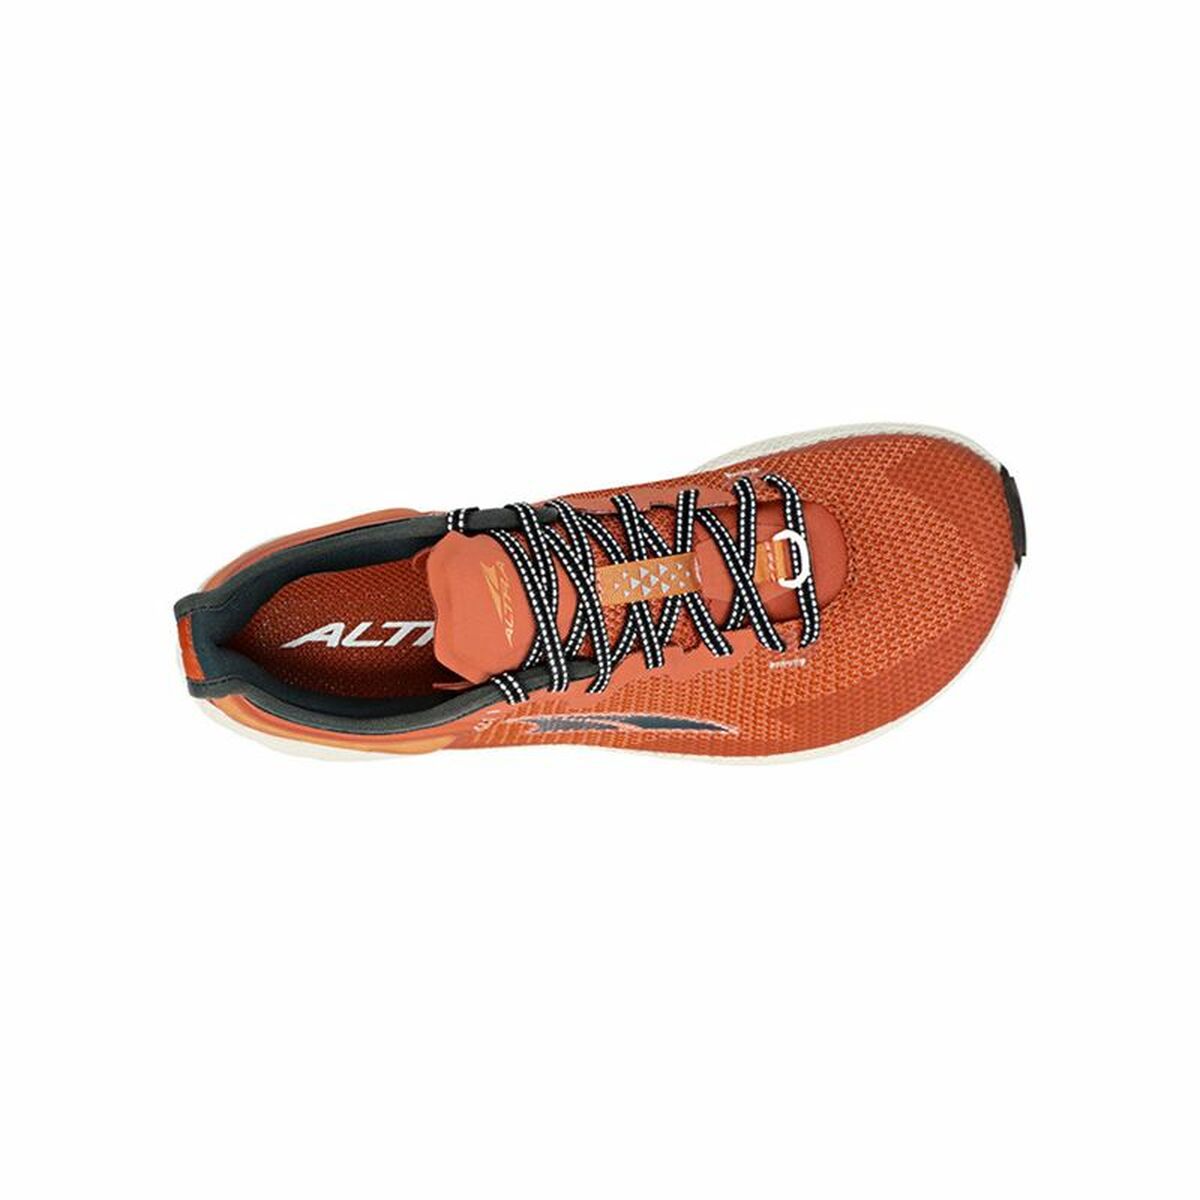 Running Shoes for Adults Altra Timp 4 Lady Orange